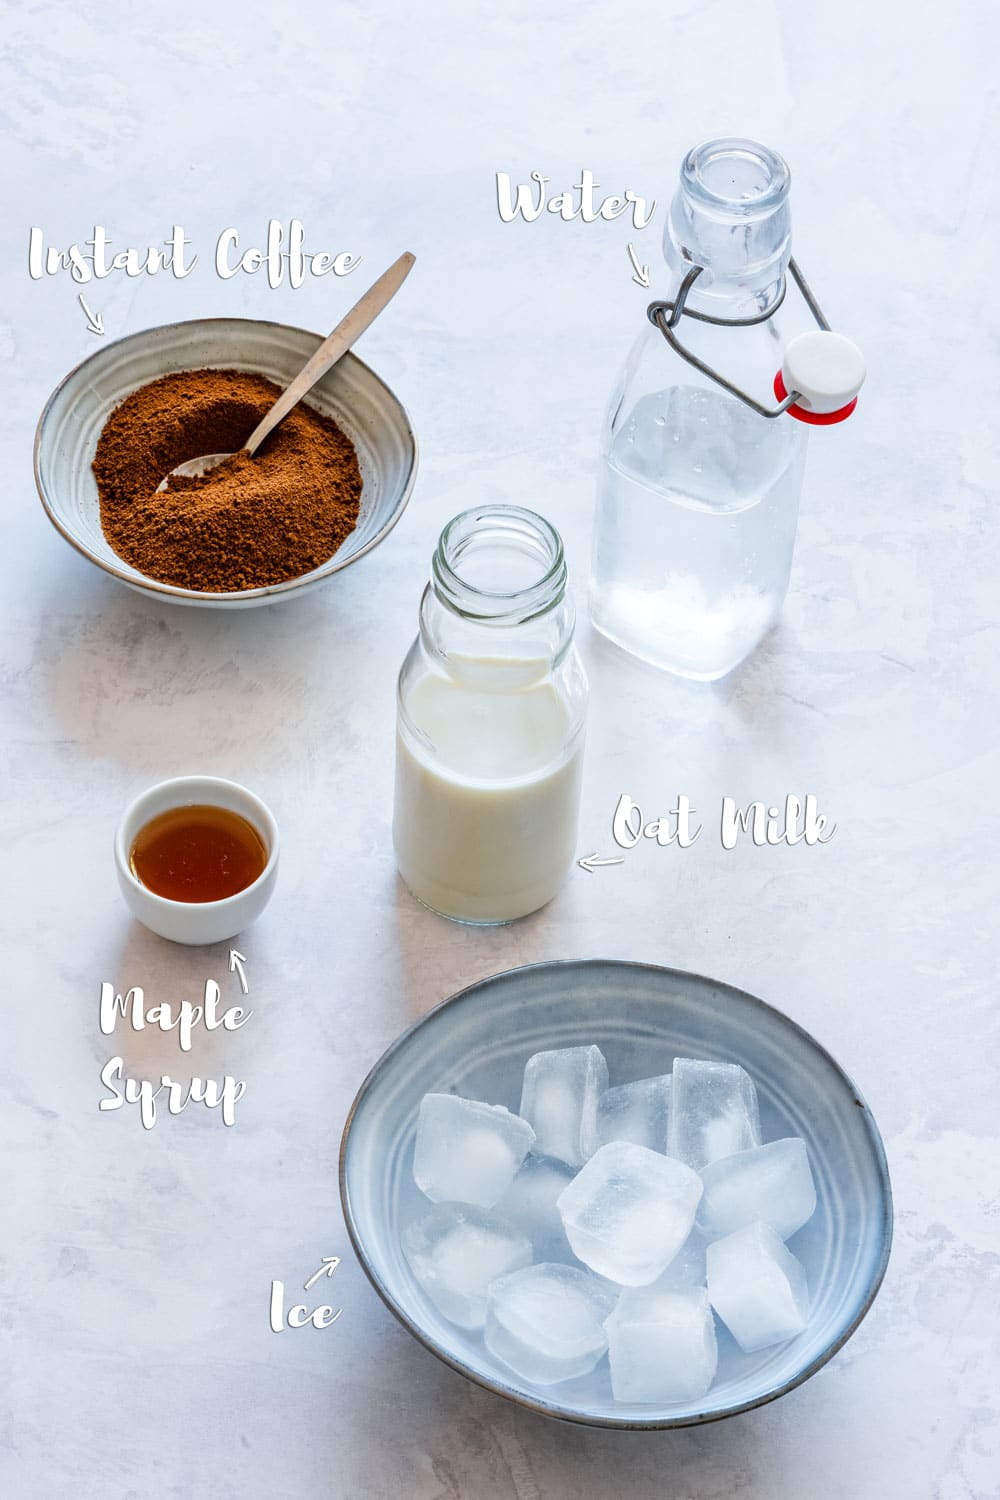 Ingredient for iced oat milk latte: instant coffee, oat milk, water, maple syrup and ice.